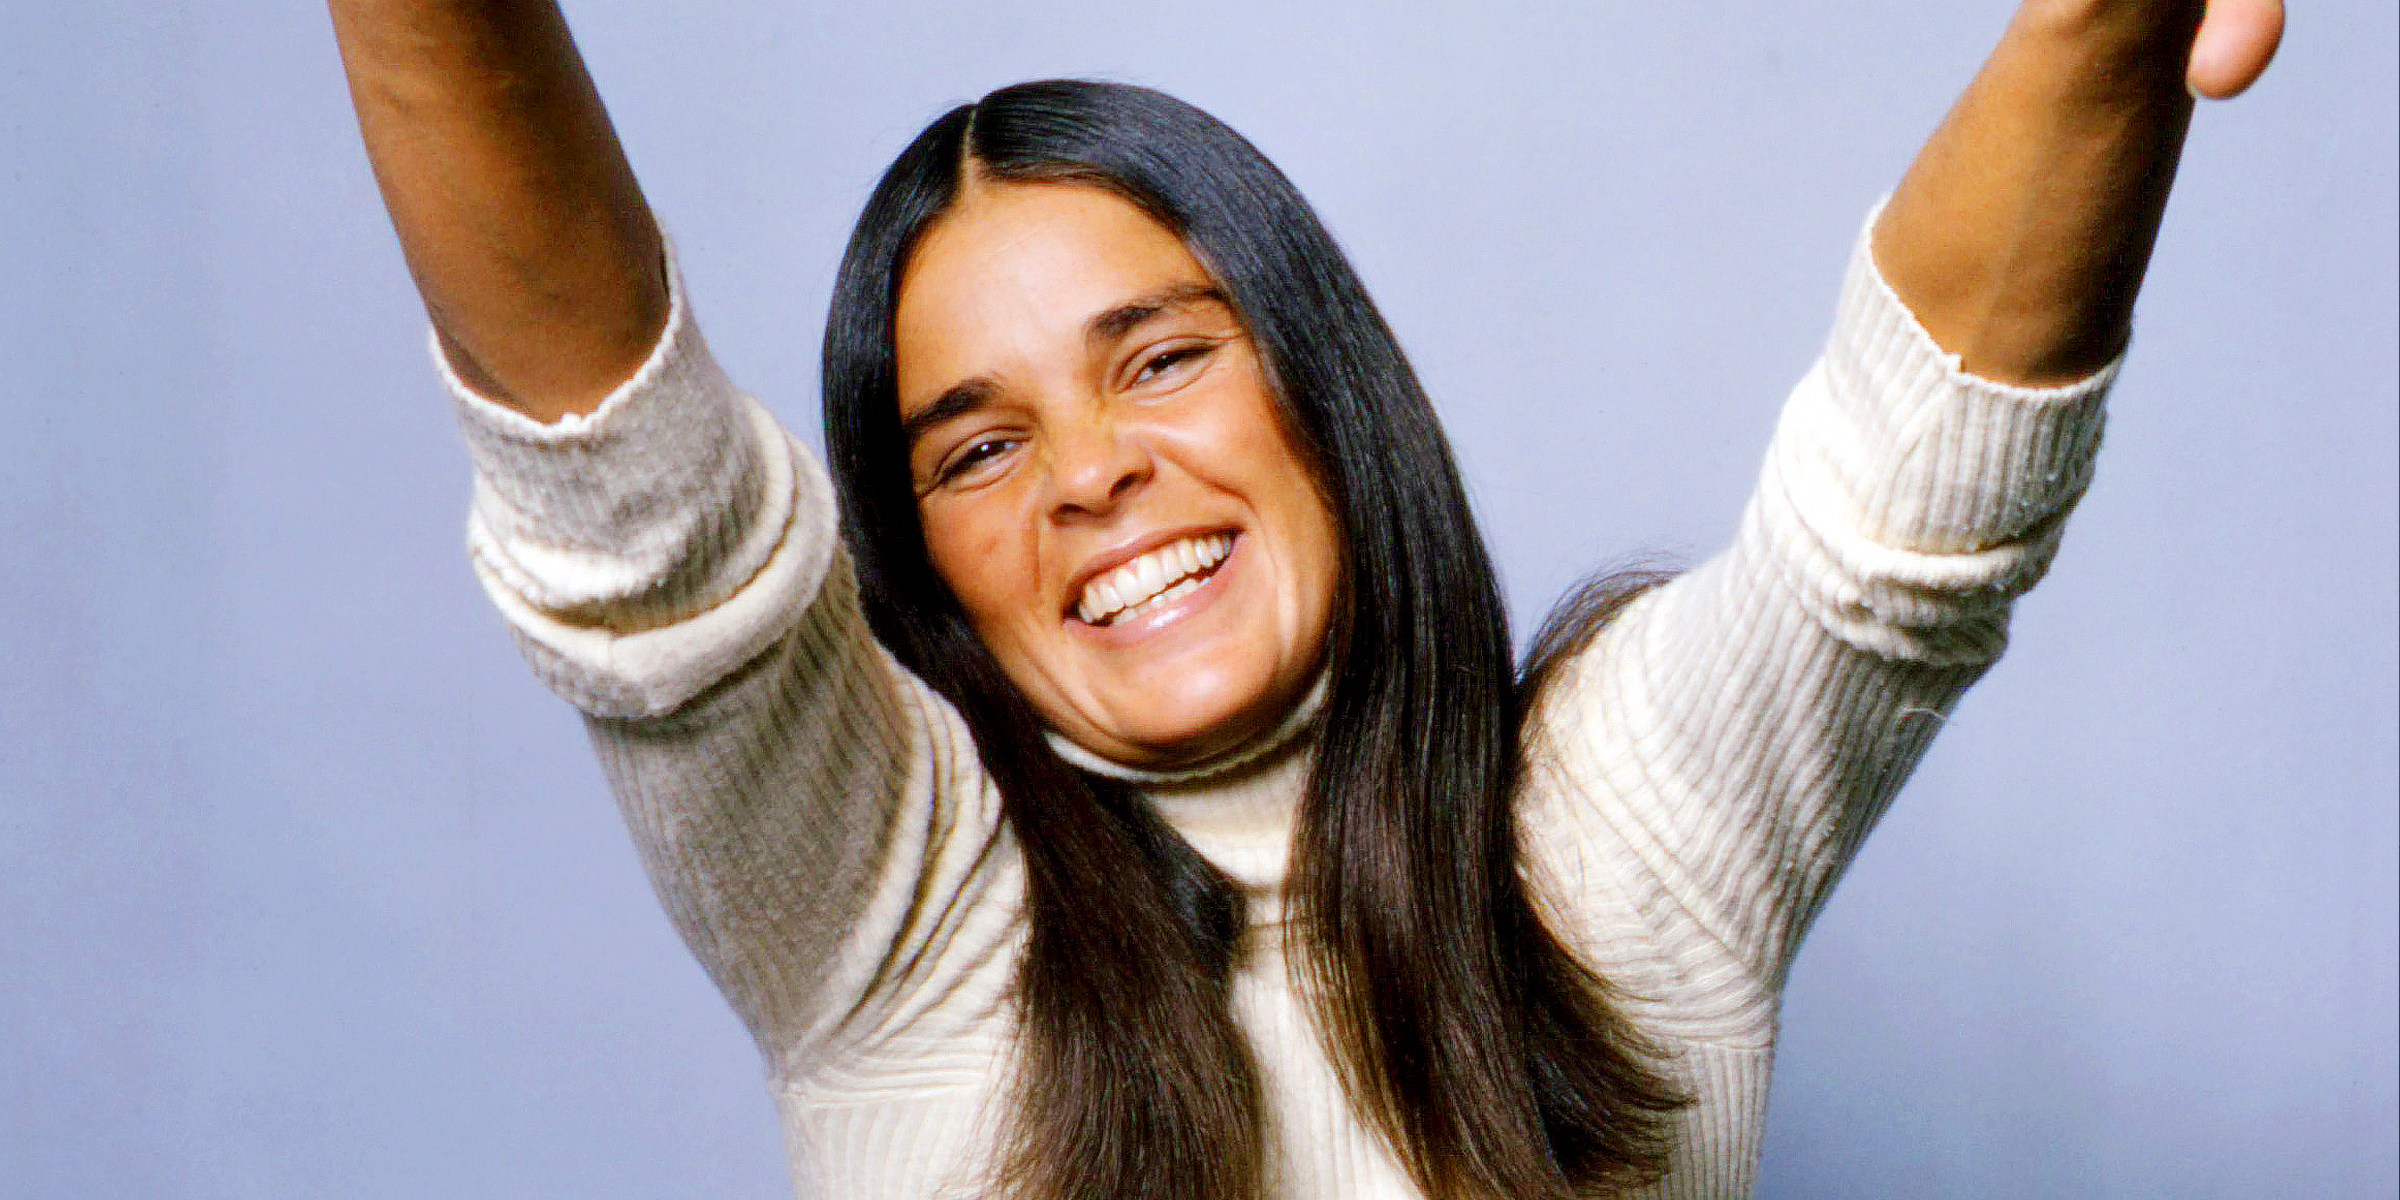 Ali MacGraw, 1970 | Sources: Getty Images